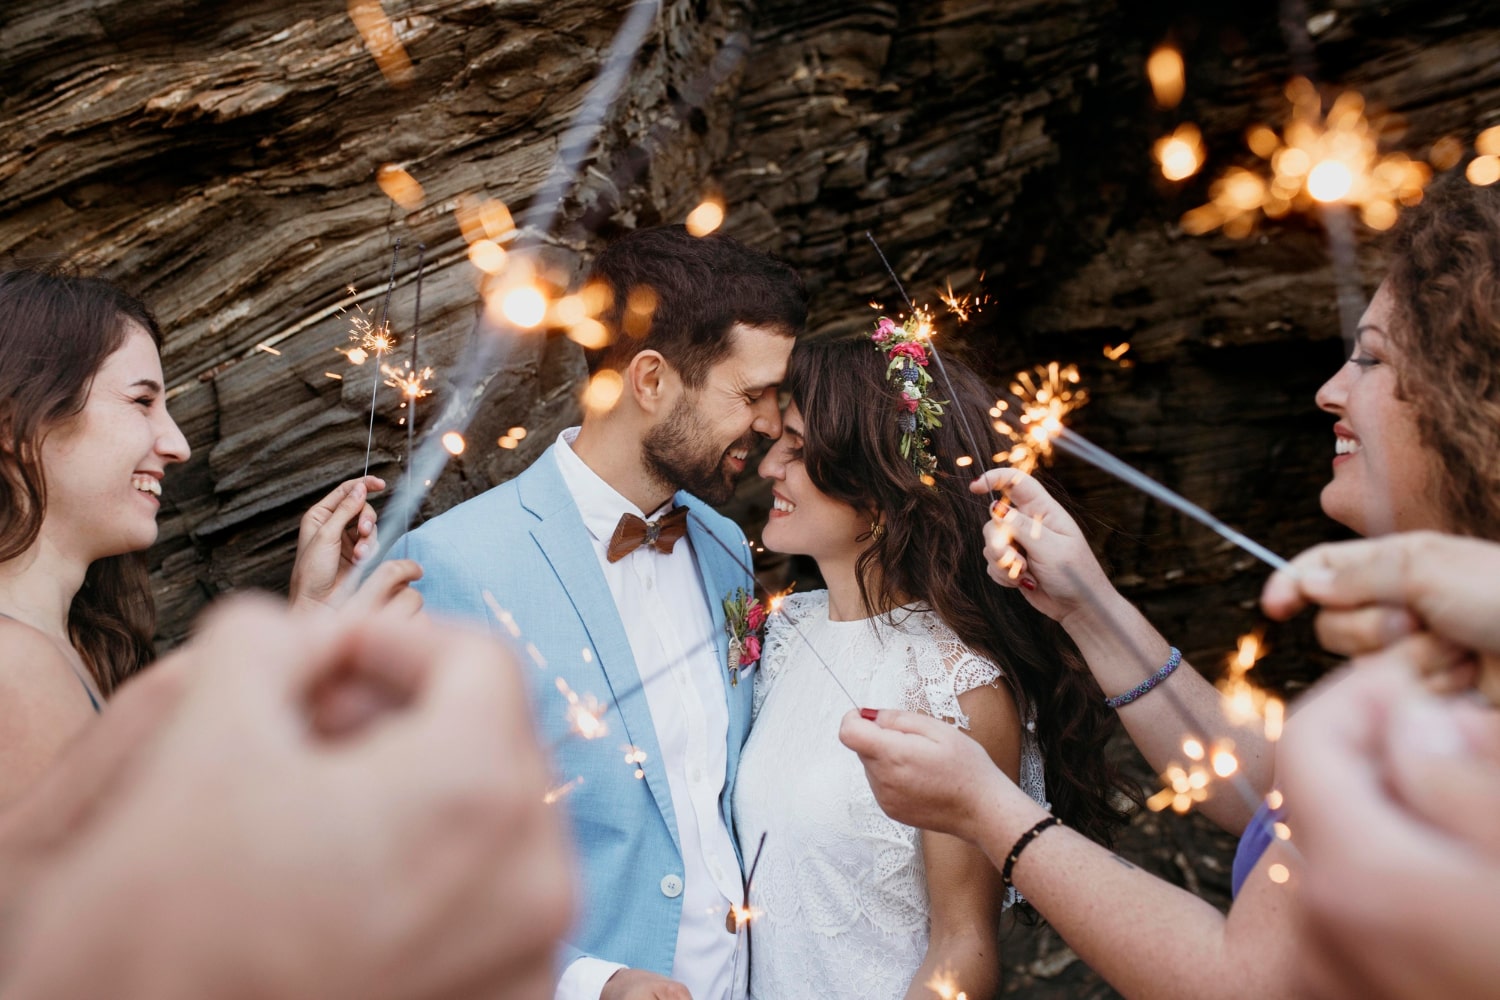 Should You Have a Wedding with Lodging for Guests On-Site?